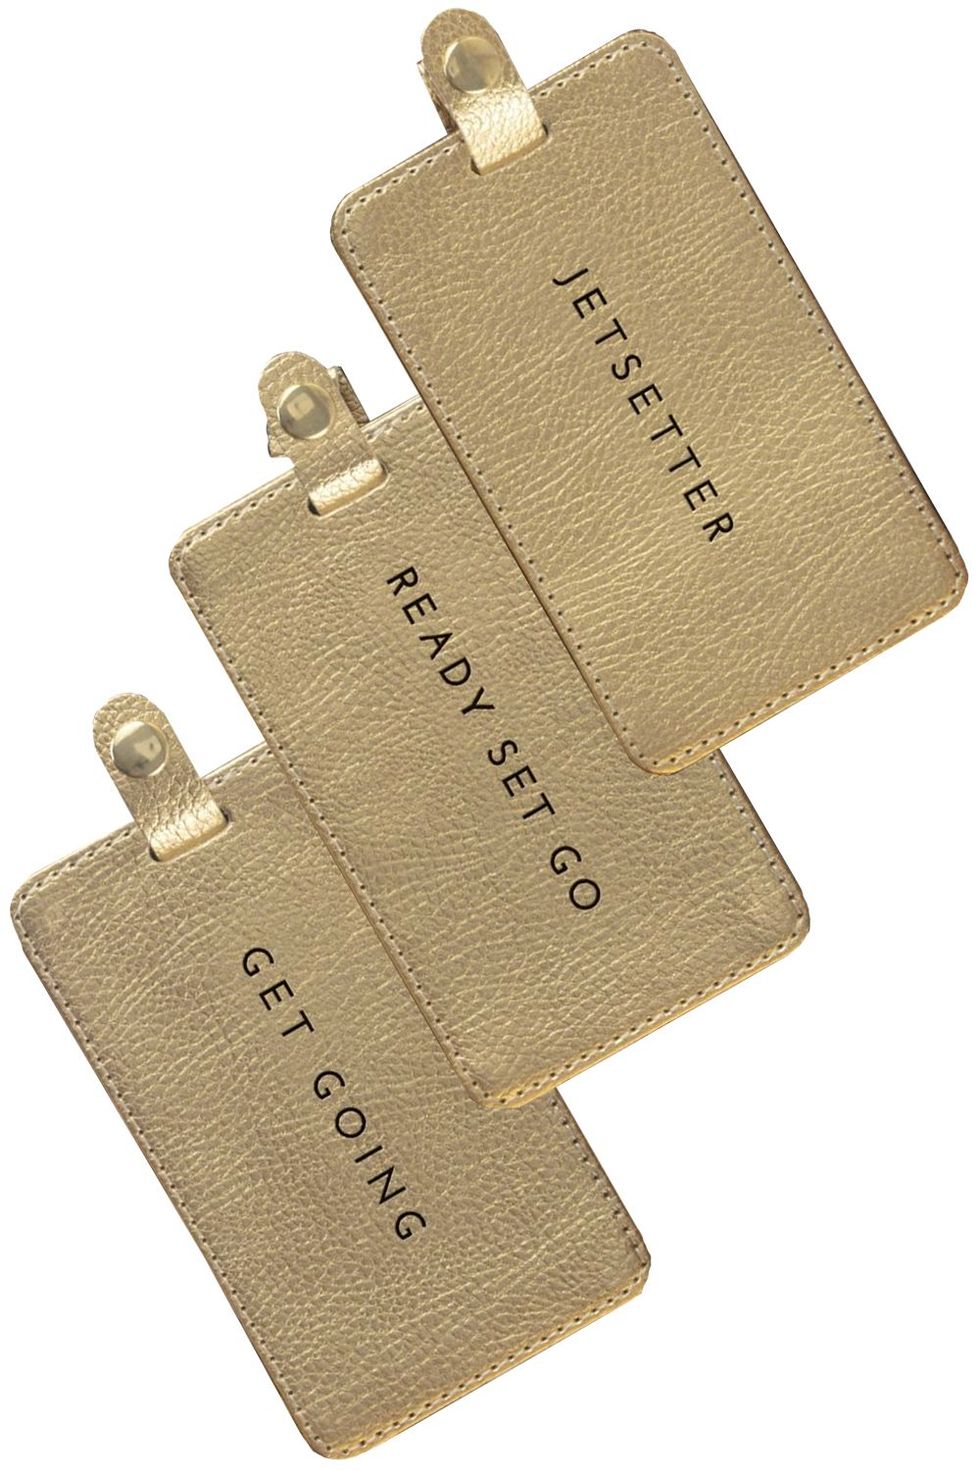 The Best Luggage Tags for International Travel - Travel Geekery